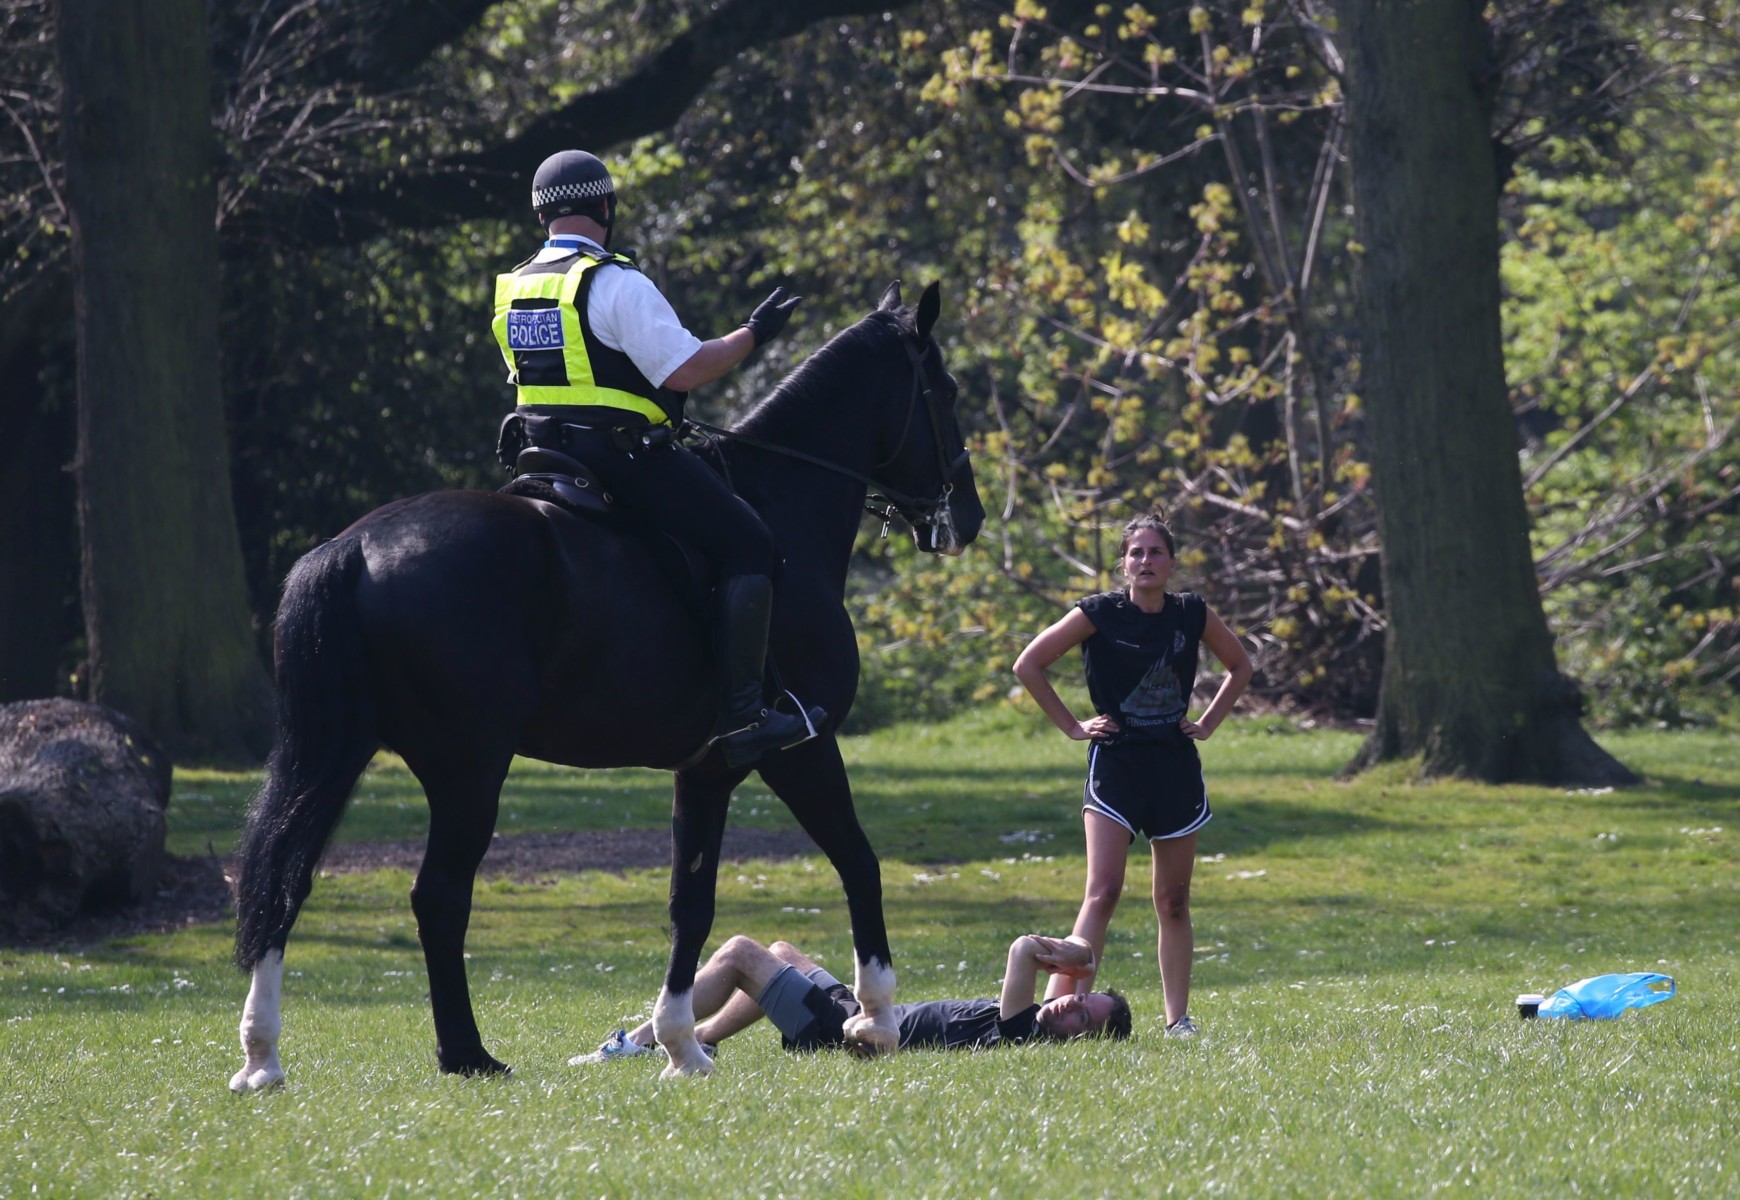 Police speak with people resting in parks over Easter weekend